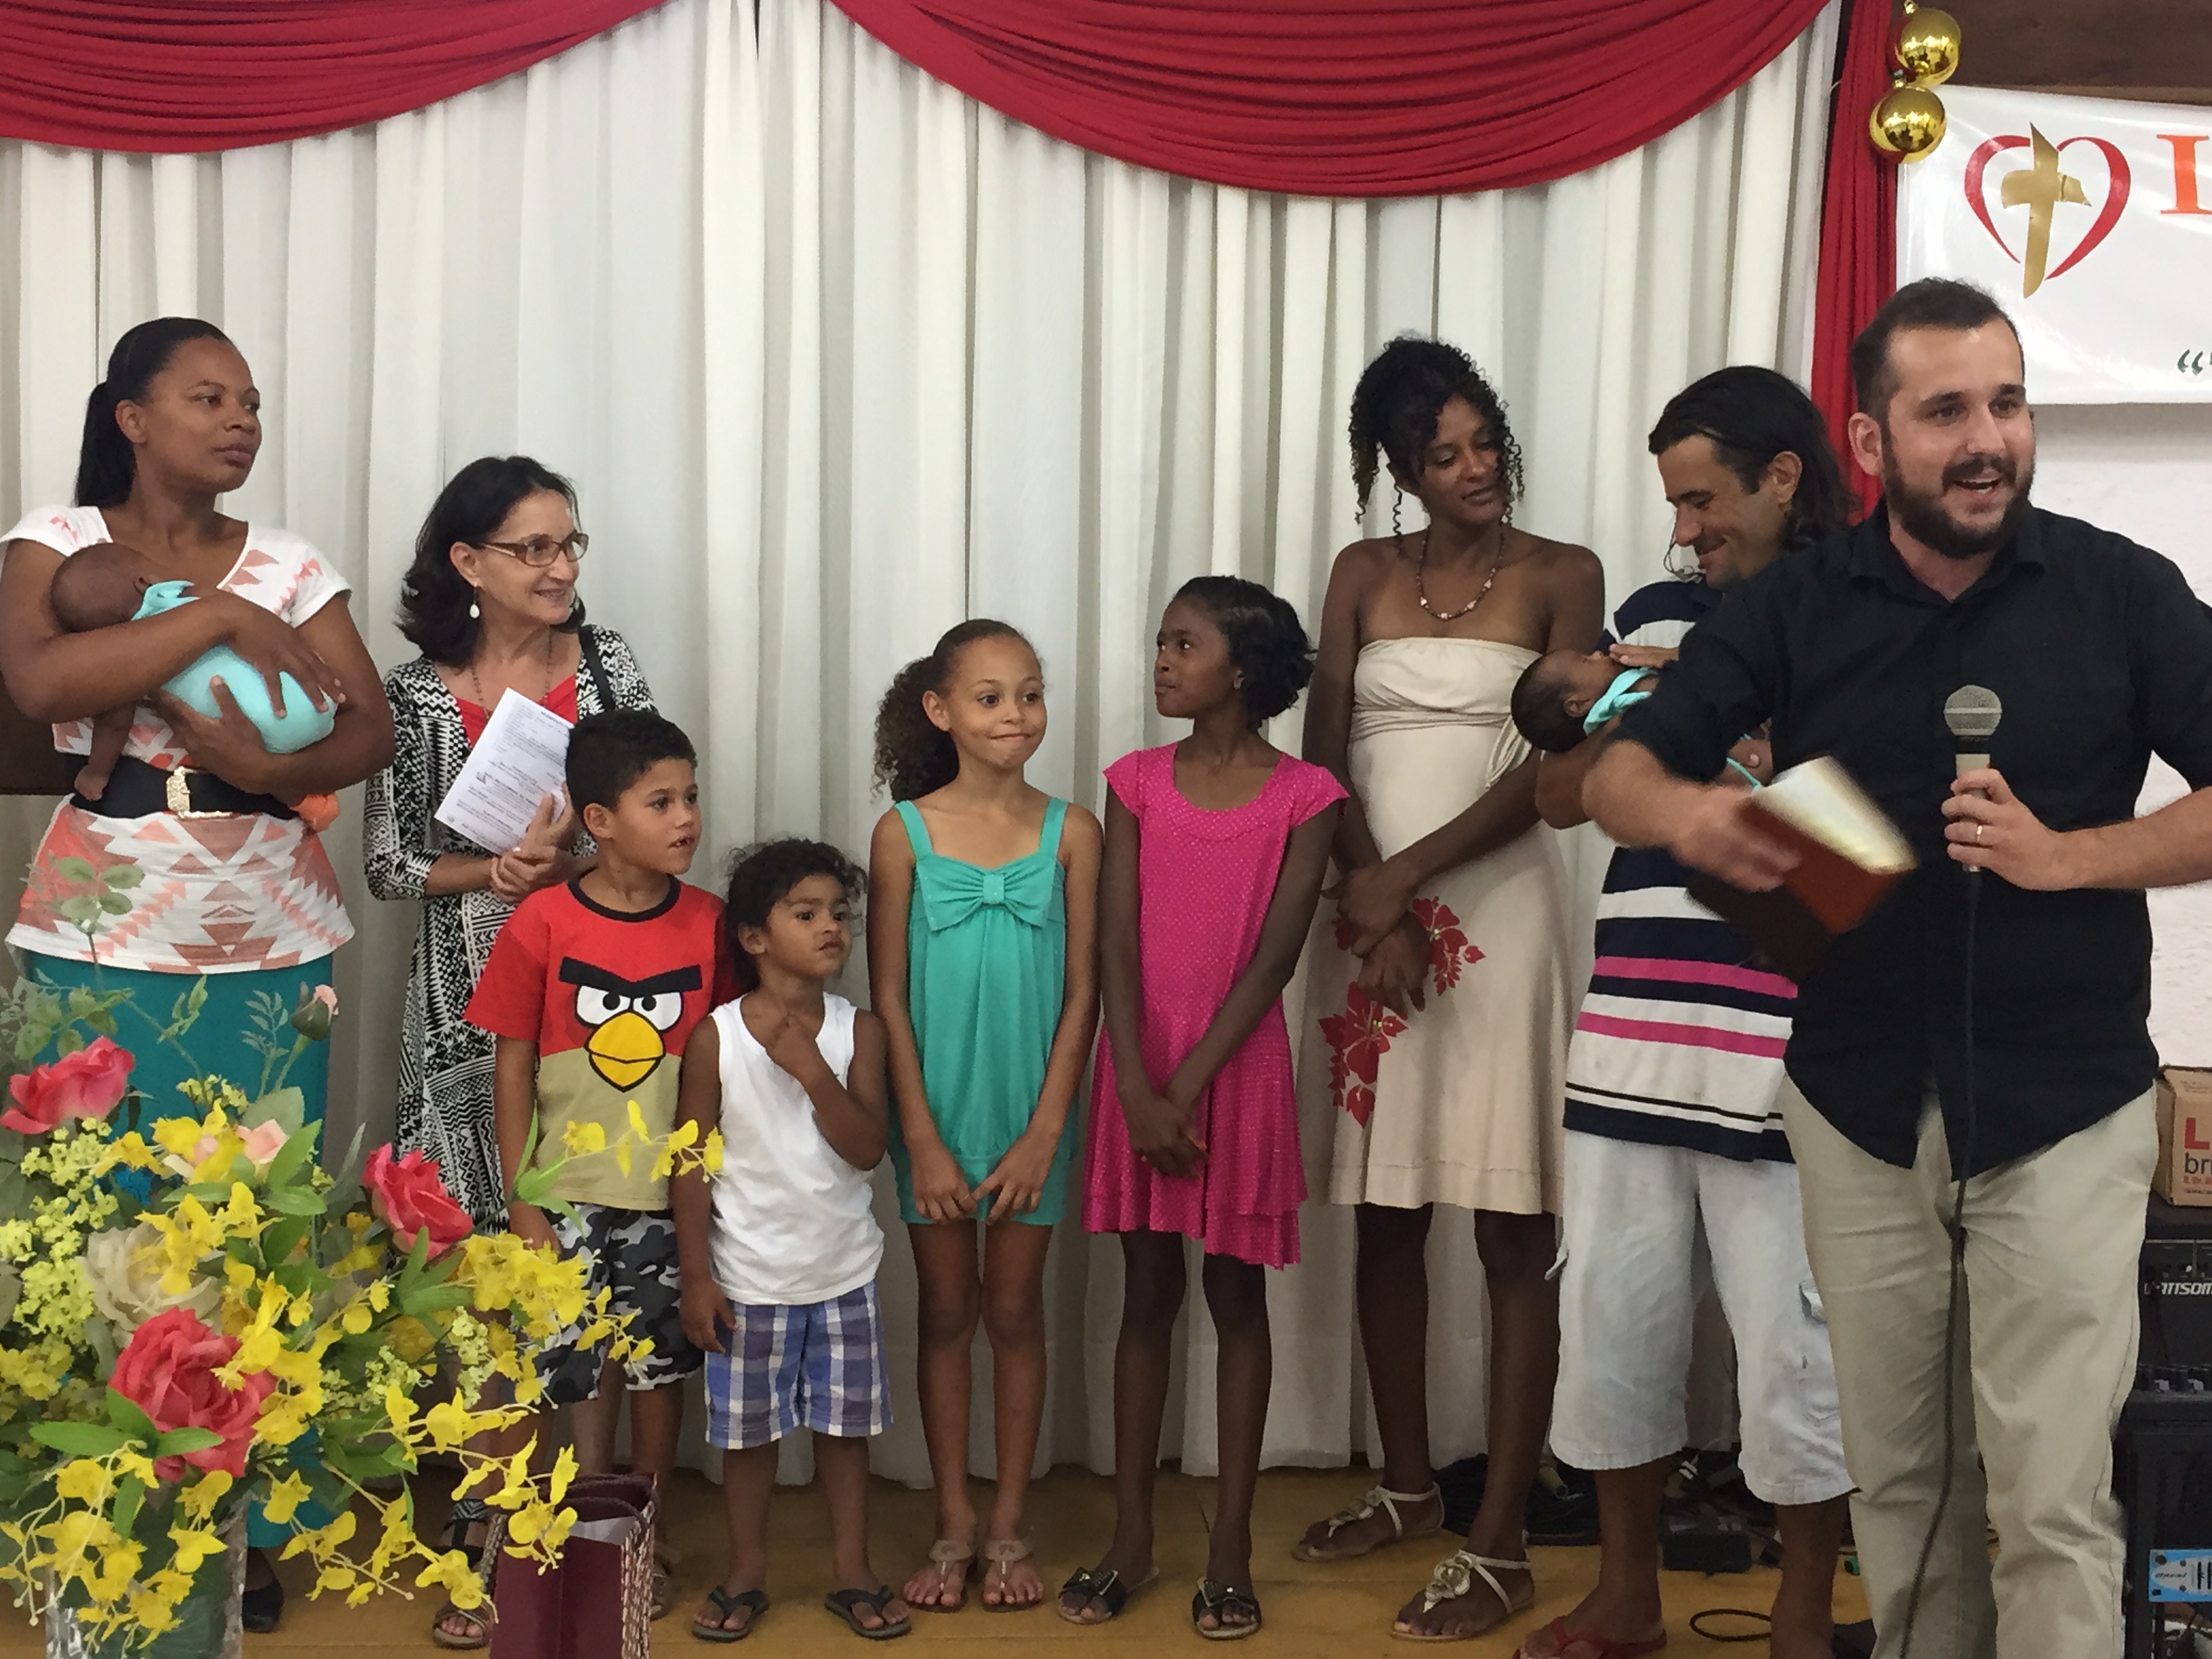 This is a family that Pastor Tiago has been working with recently, doing Bible studies, praying with them, and providing assistance.  The parents Fluvia and Felipe are drug users, and they have recently had twins.  This photo is from their recent baby dedication.